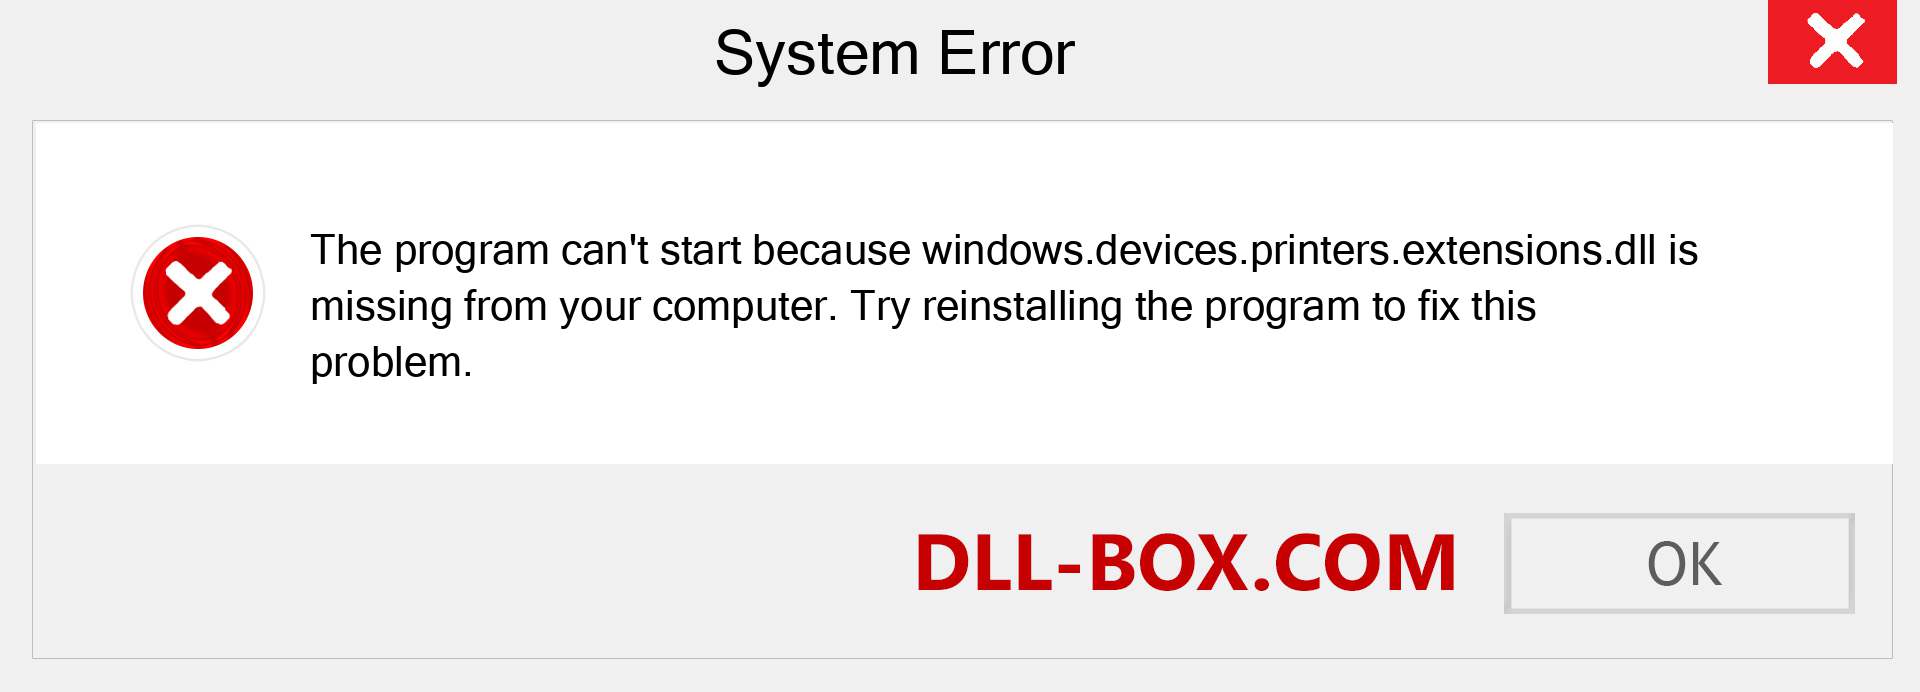  windows.devices.printers.extensions.dll file is missing?. Download for Windows 7, 8, 10 - Fix  windows.devices.printers.extensions dll Missing Error on Windows, photos, images